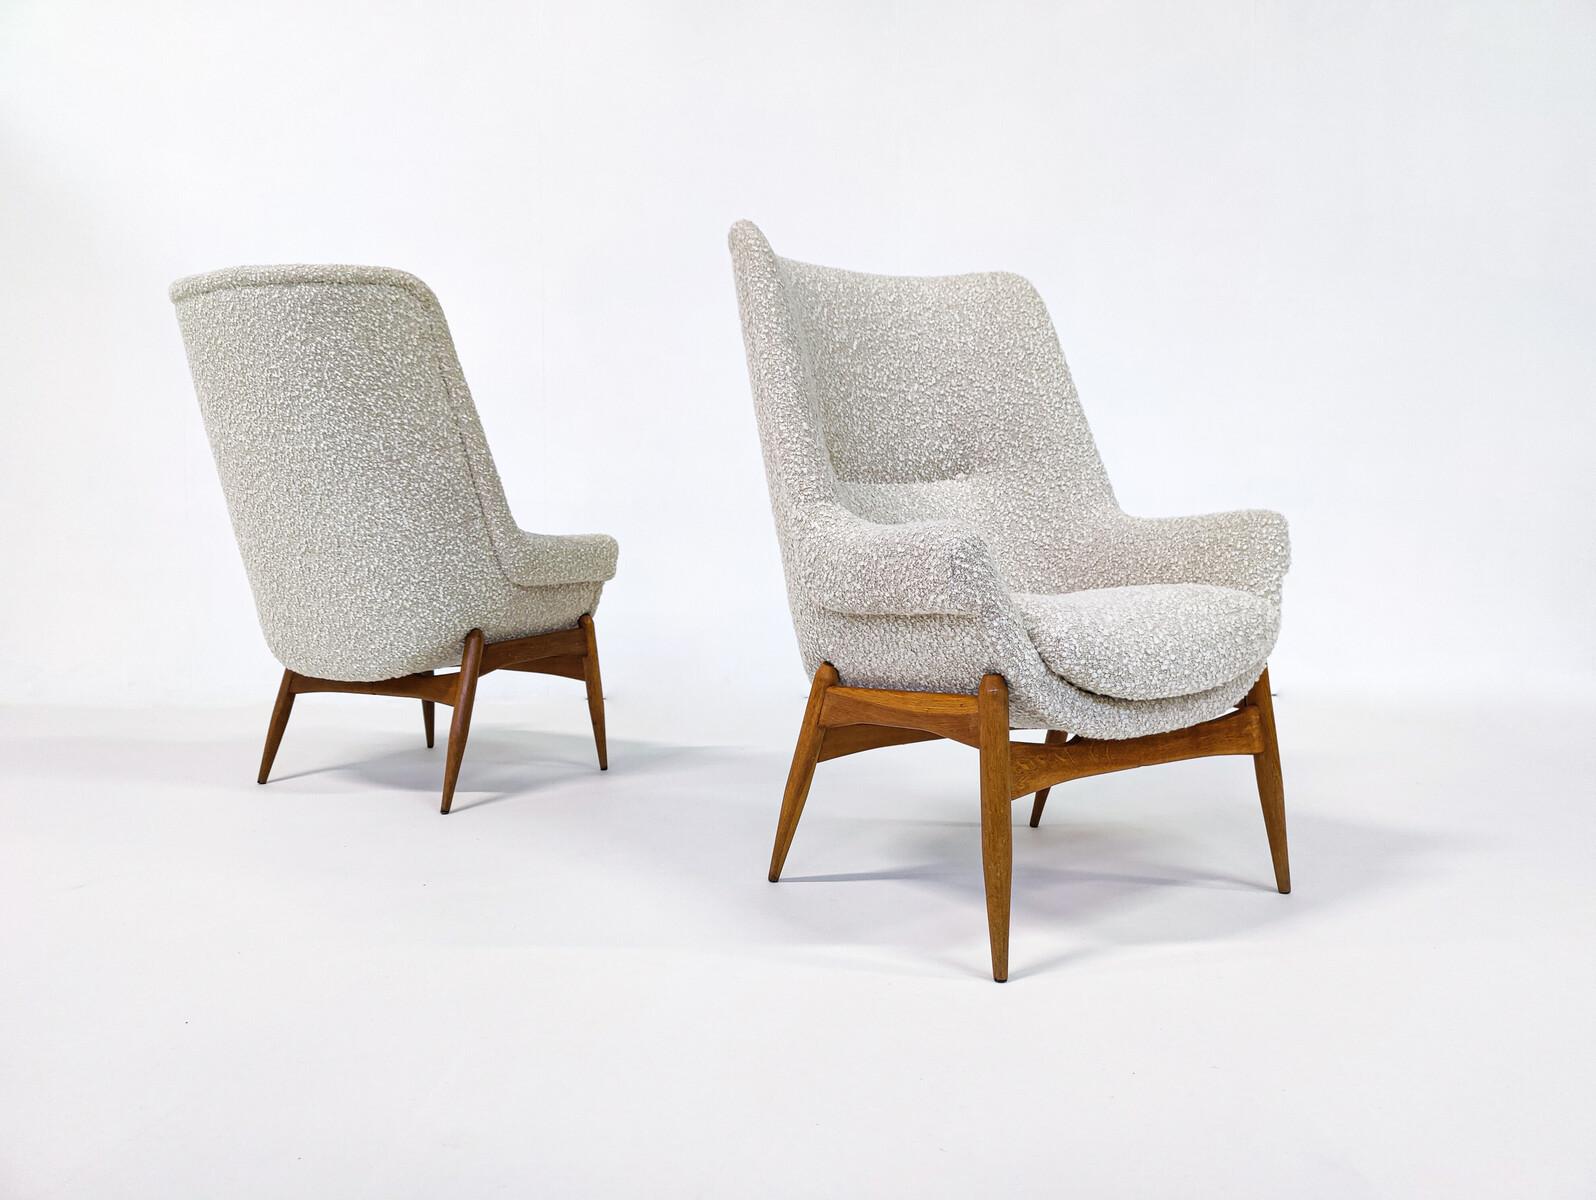 Pair of Mid-Century Modern Beige Fabric Armchairs by Julia Gaubek, Hungary, 1950 In Good Condition For Sale In Brussels, BE